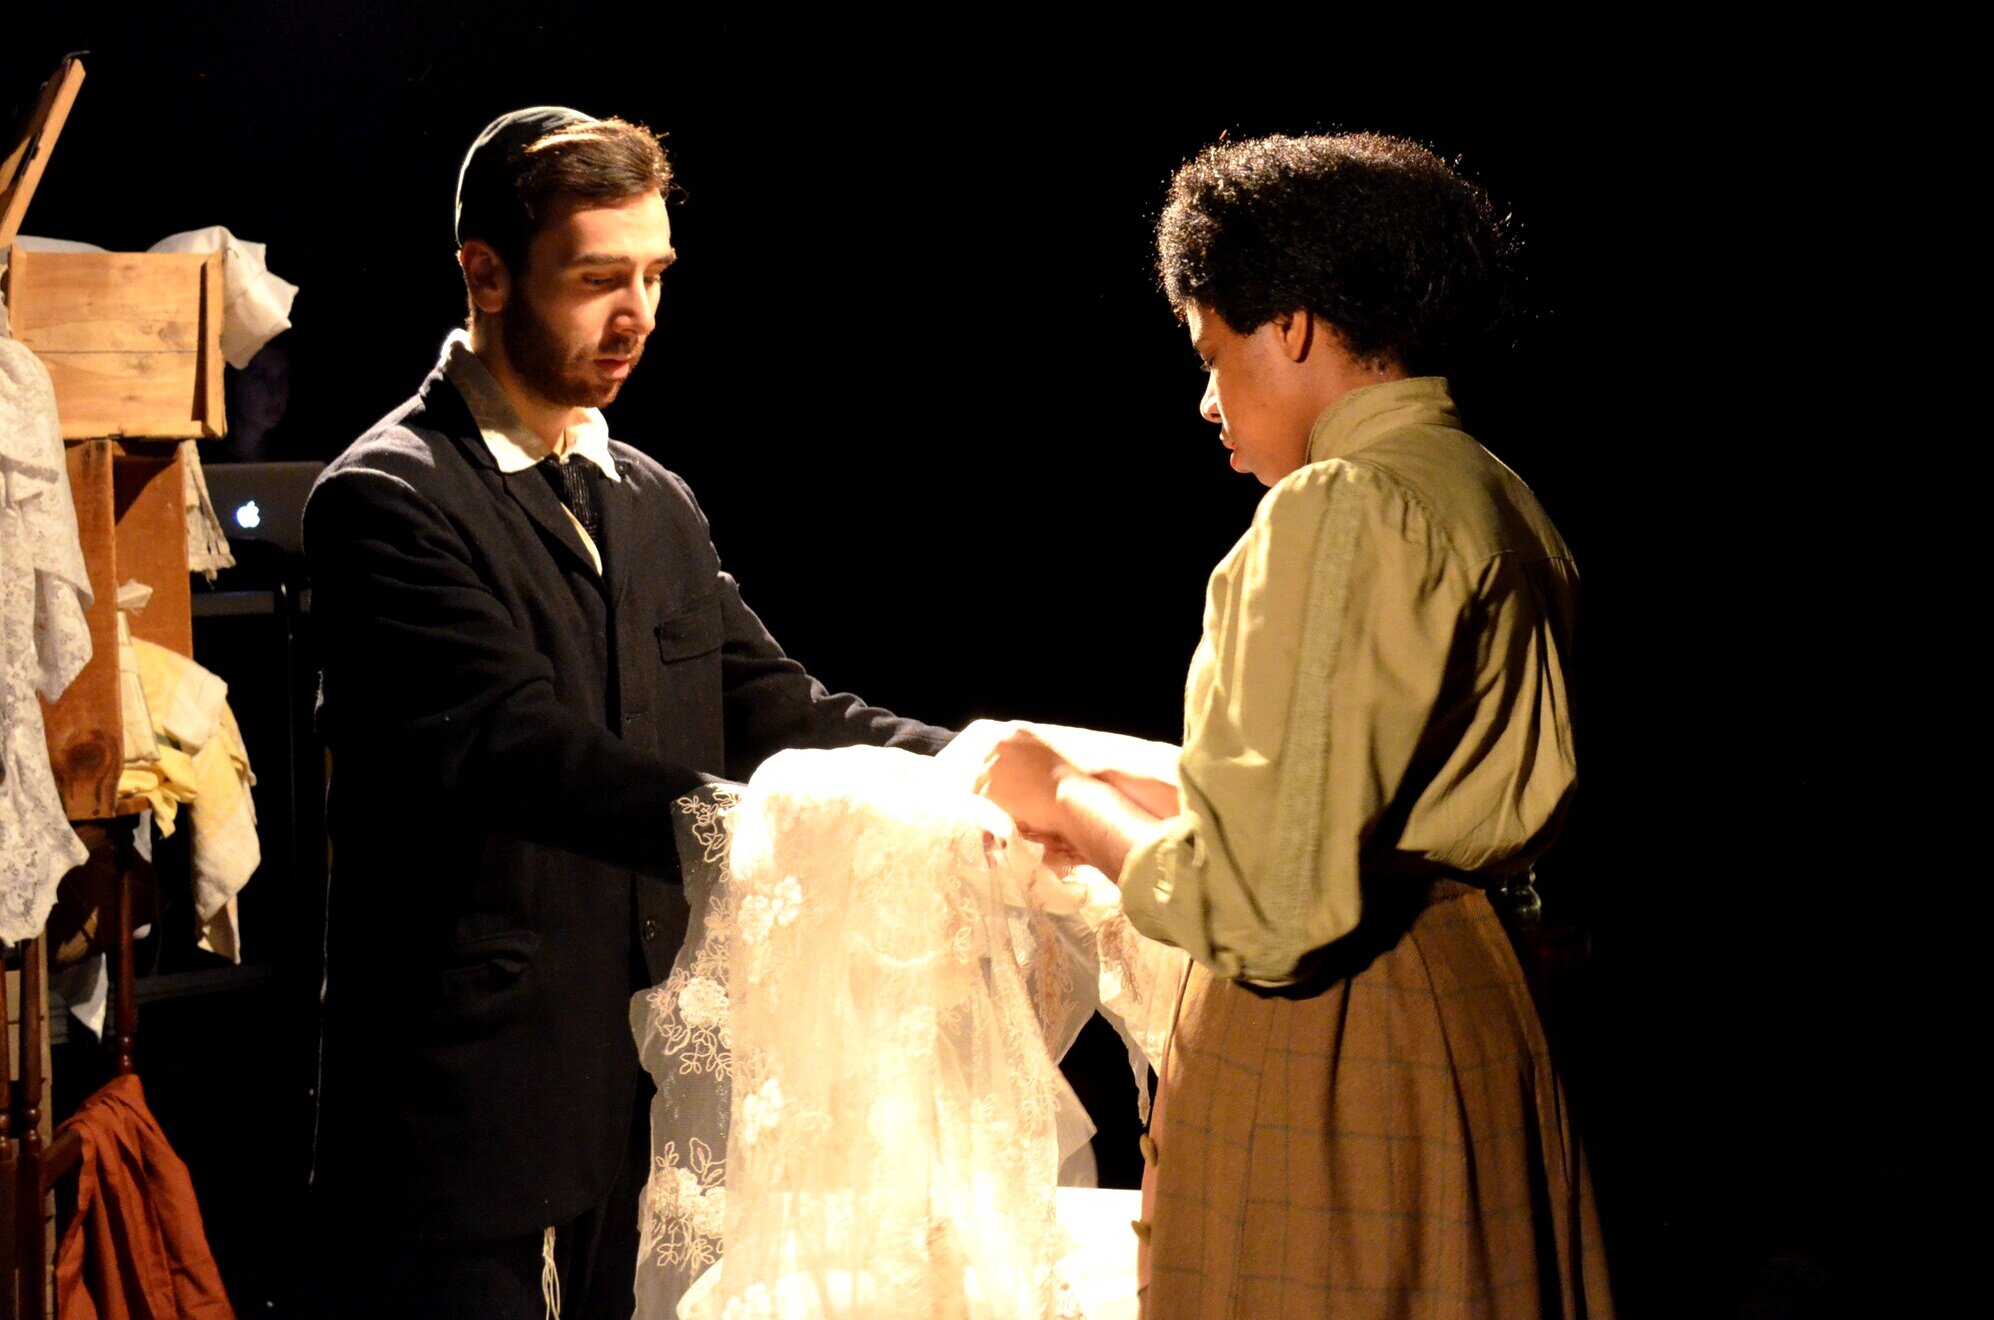  Josh Gluck as Mr. Marks and Dani Palmer as Esther Mills in INTIMATE APPAREL, directed by Avital Shira. Photo by Stephanie Lynn Yackovetsky. 